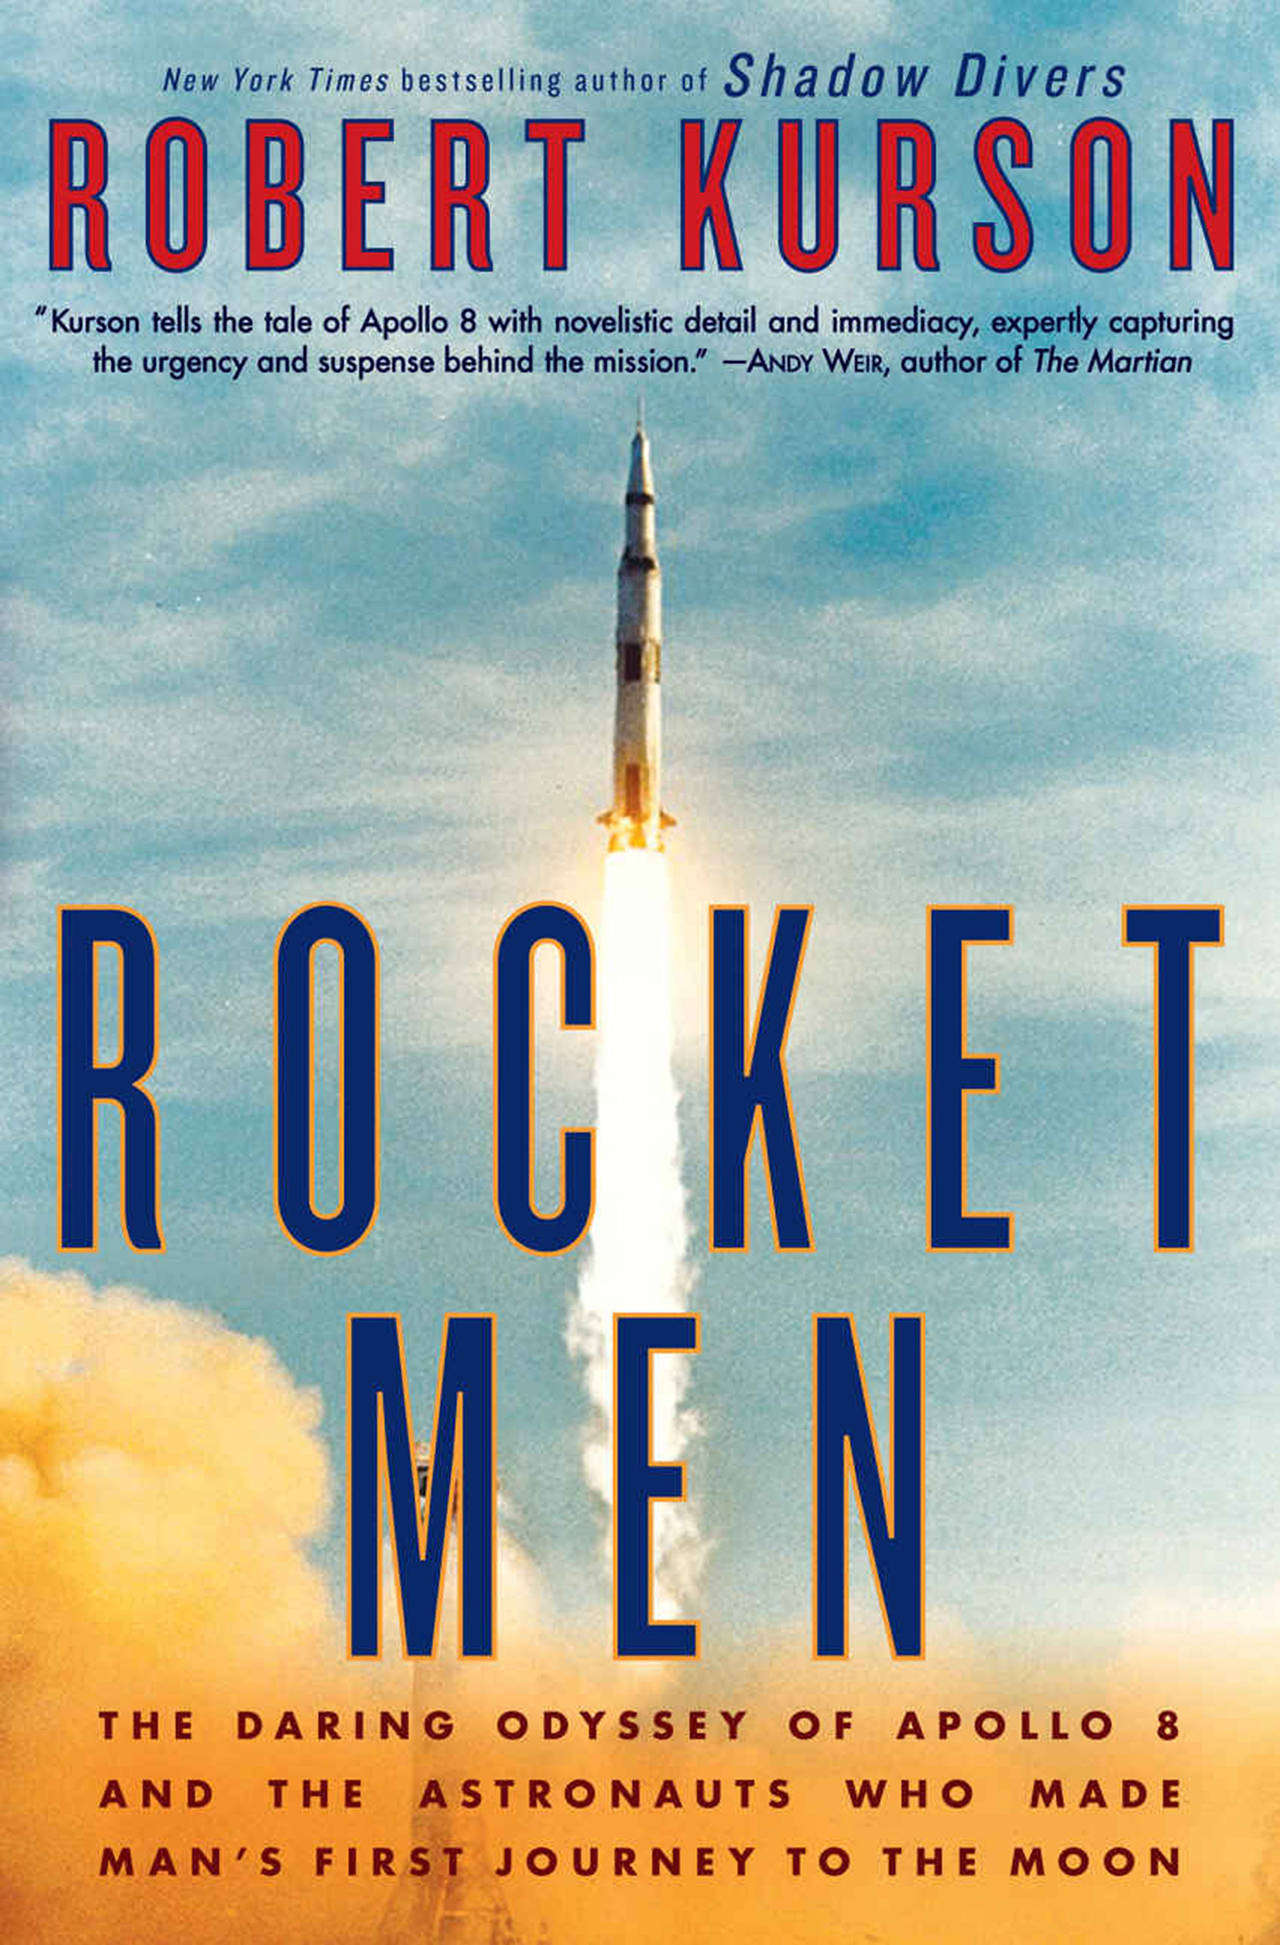 “Rocket Men: The Daring Odyssey of Apollo 8 and the Astronauts Who Made Man’s First Journey to the Moon” by Rob Kurson; Random House (384 pages, $28)